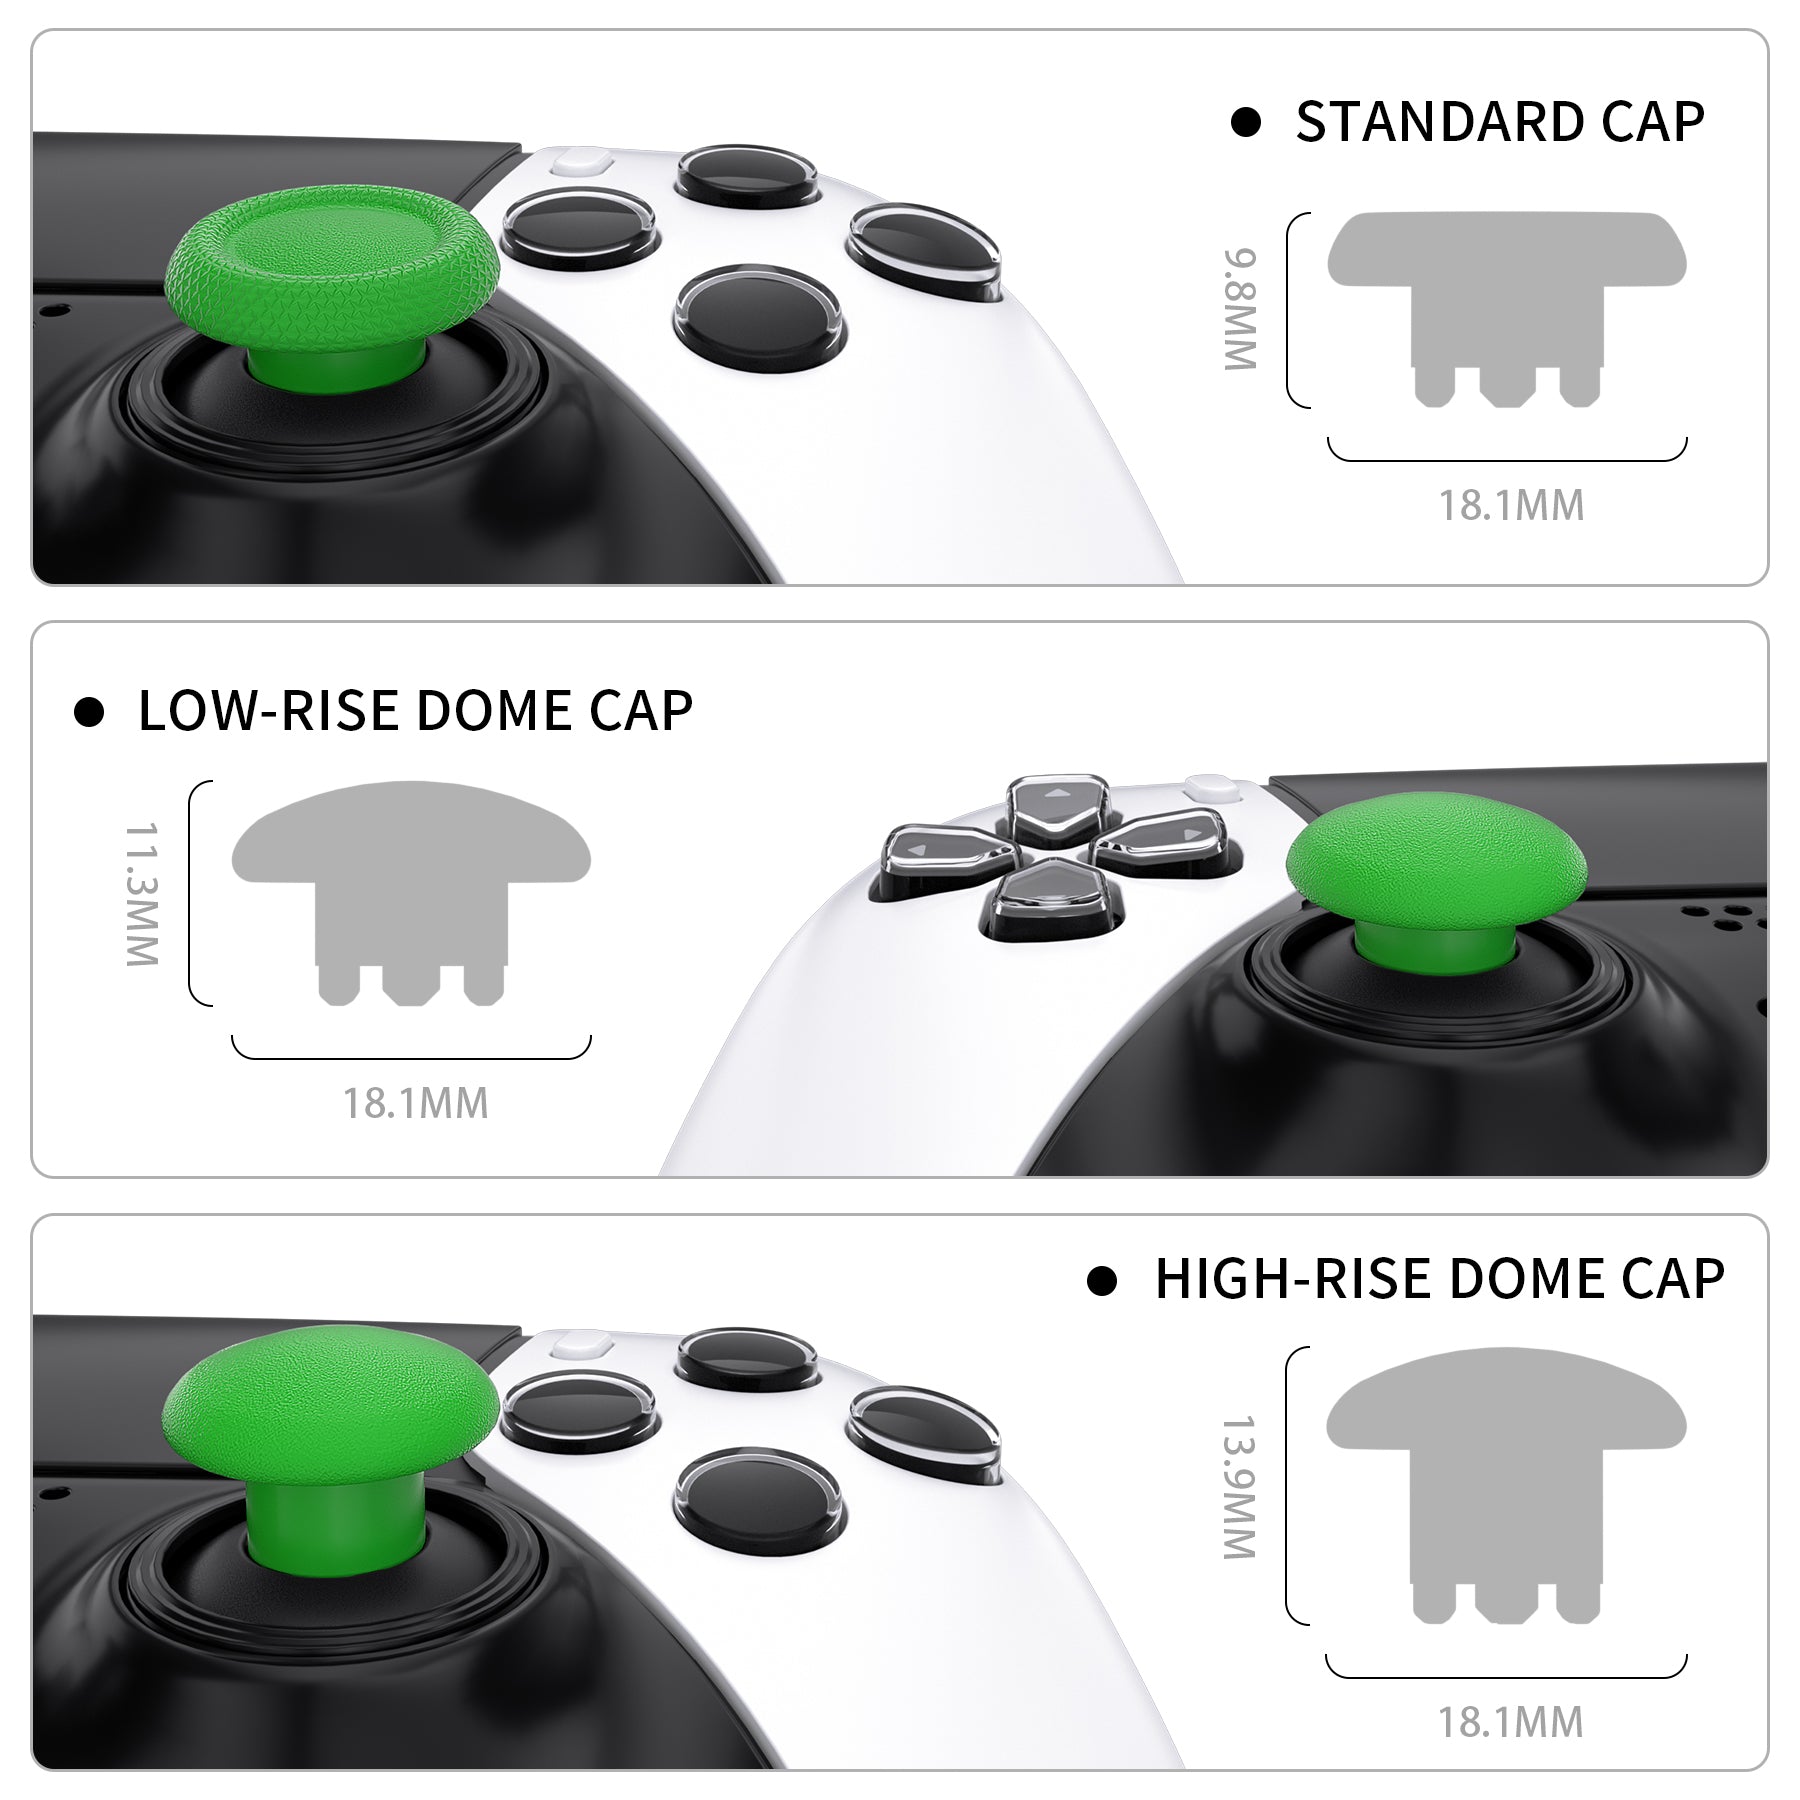 eXtremeRate Retail Green Replacement Swappable Thumbsticks for PS5 Edge Controller, Custom Interchangeable Analog Stick Joystick Caps for PS5 Edge Controller - Controller & Thumbsticks Base NOT Included - P5J107